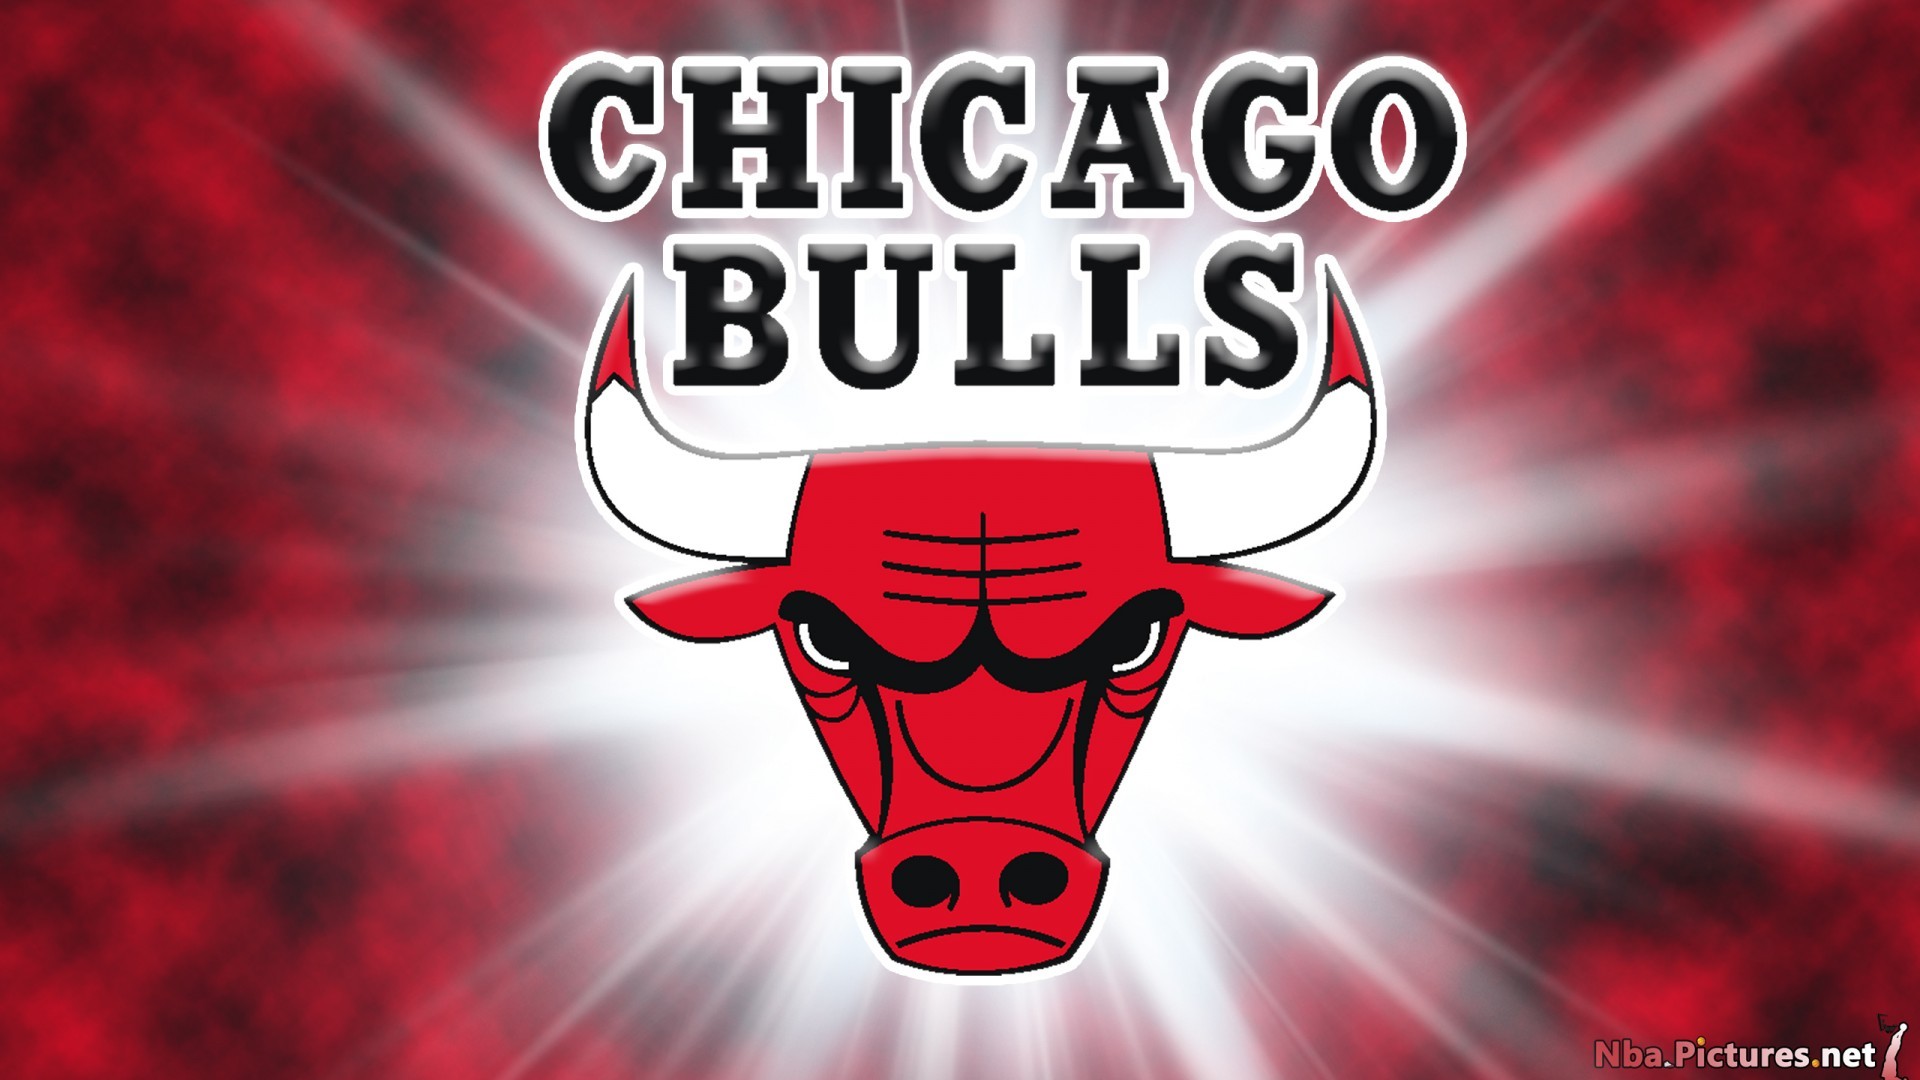 1920x1080 Are you really a Bulls fan?